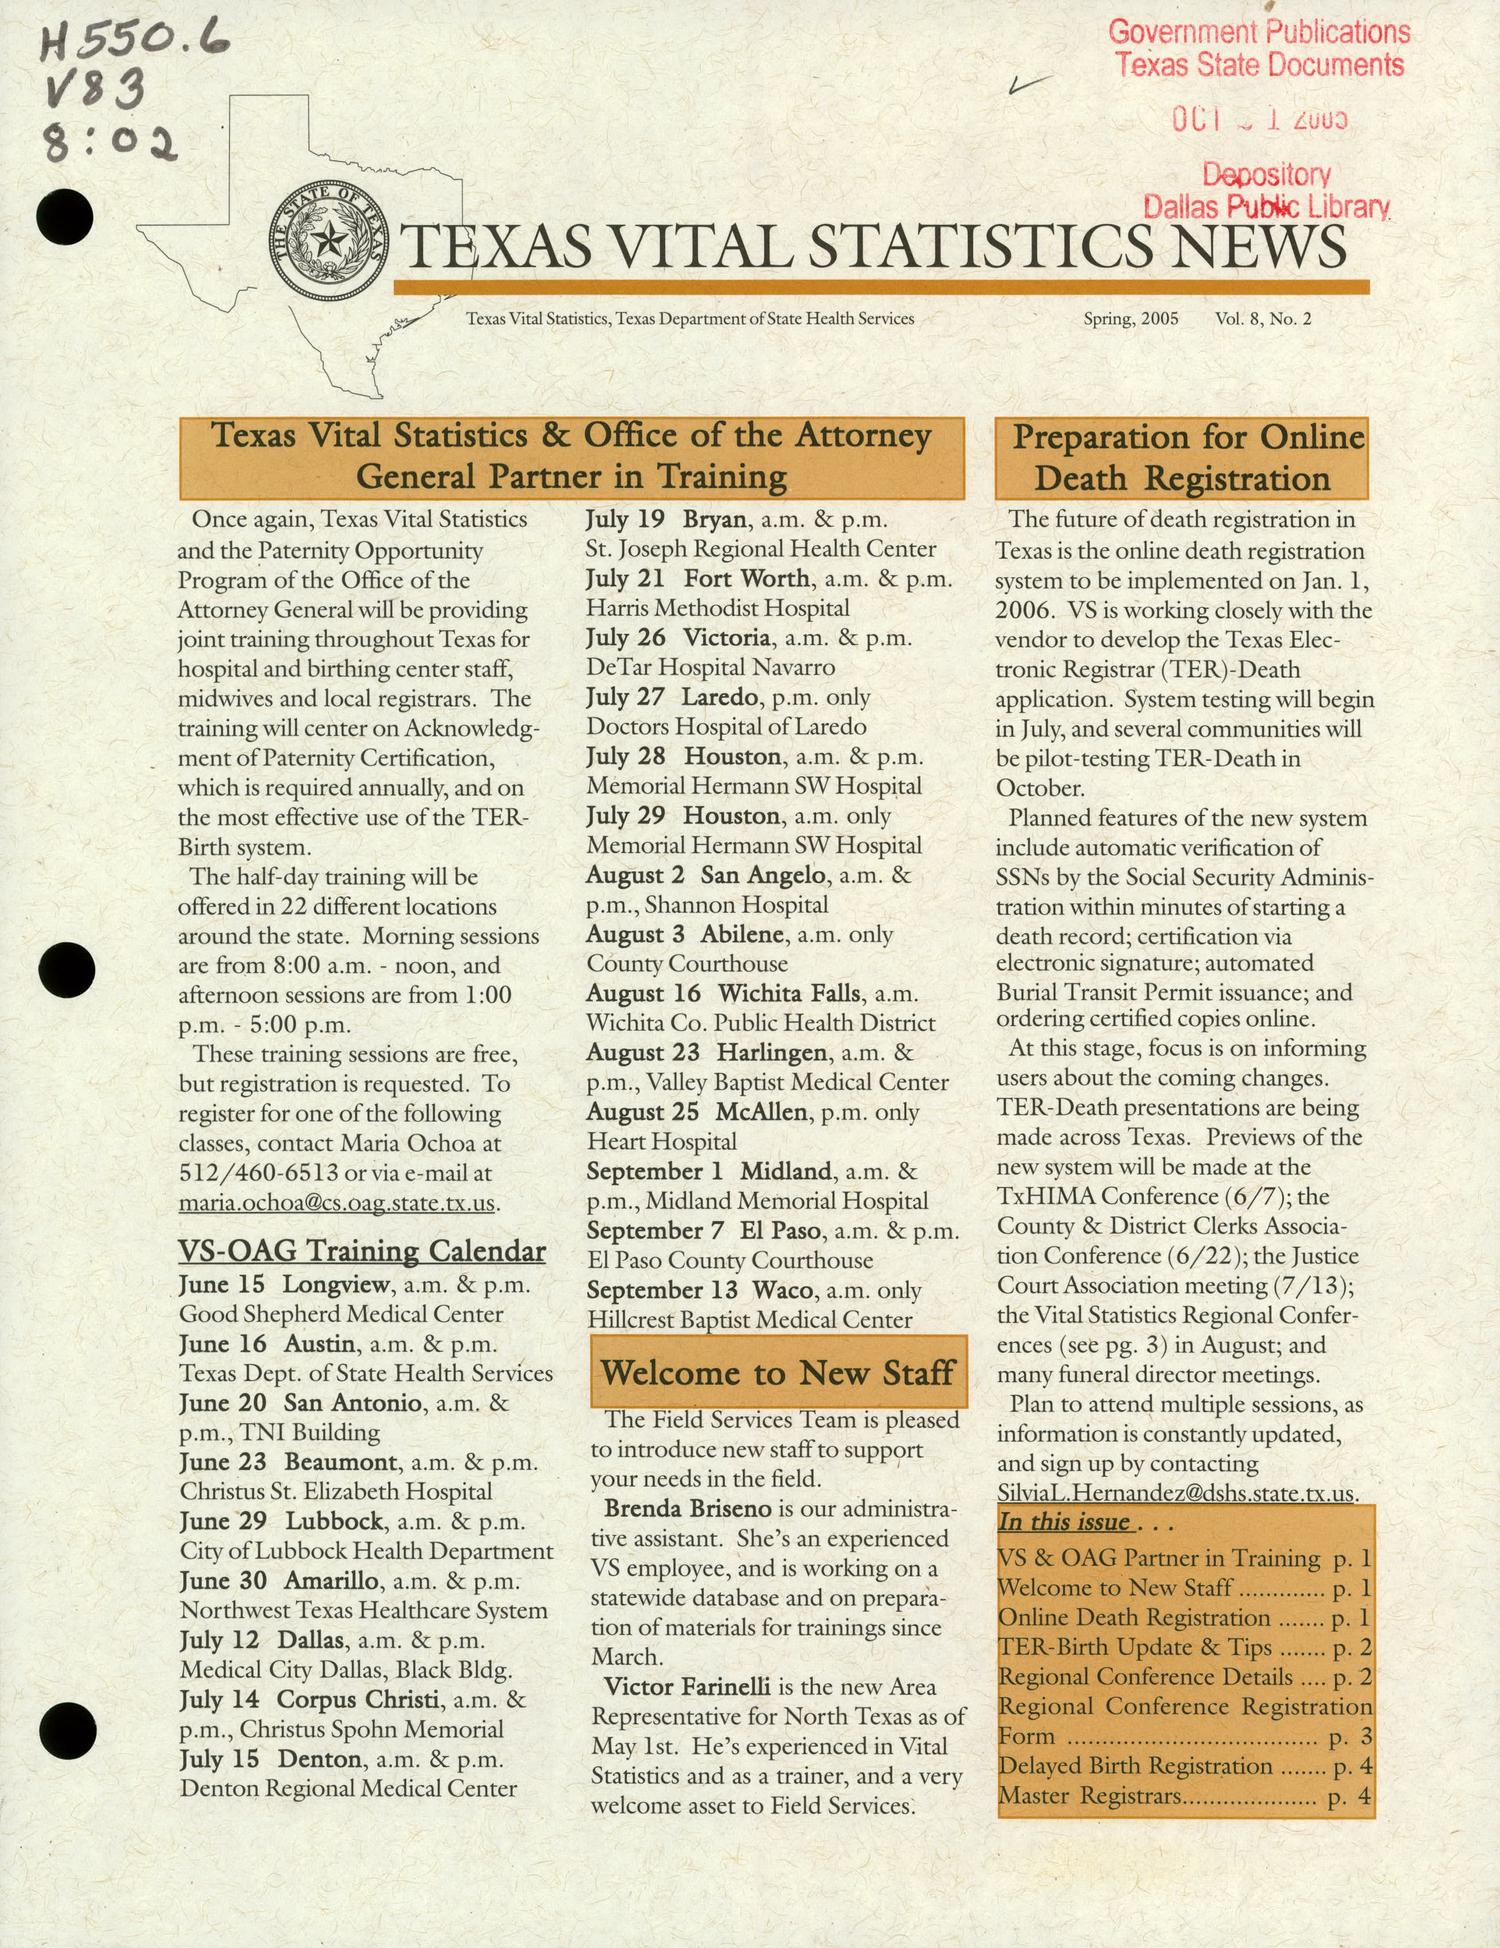 Texas Vital Statistics News, Volume 8, Number 2, Spring 2005
                                                
                                                    FRONT COVER
                                                